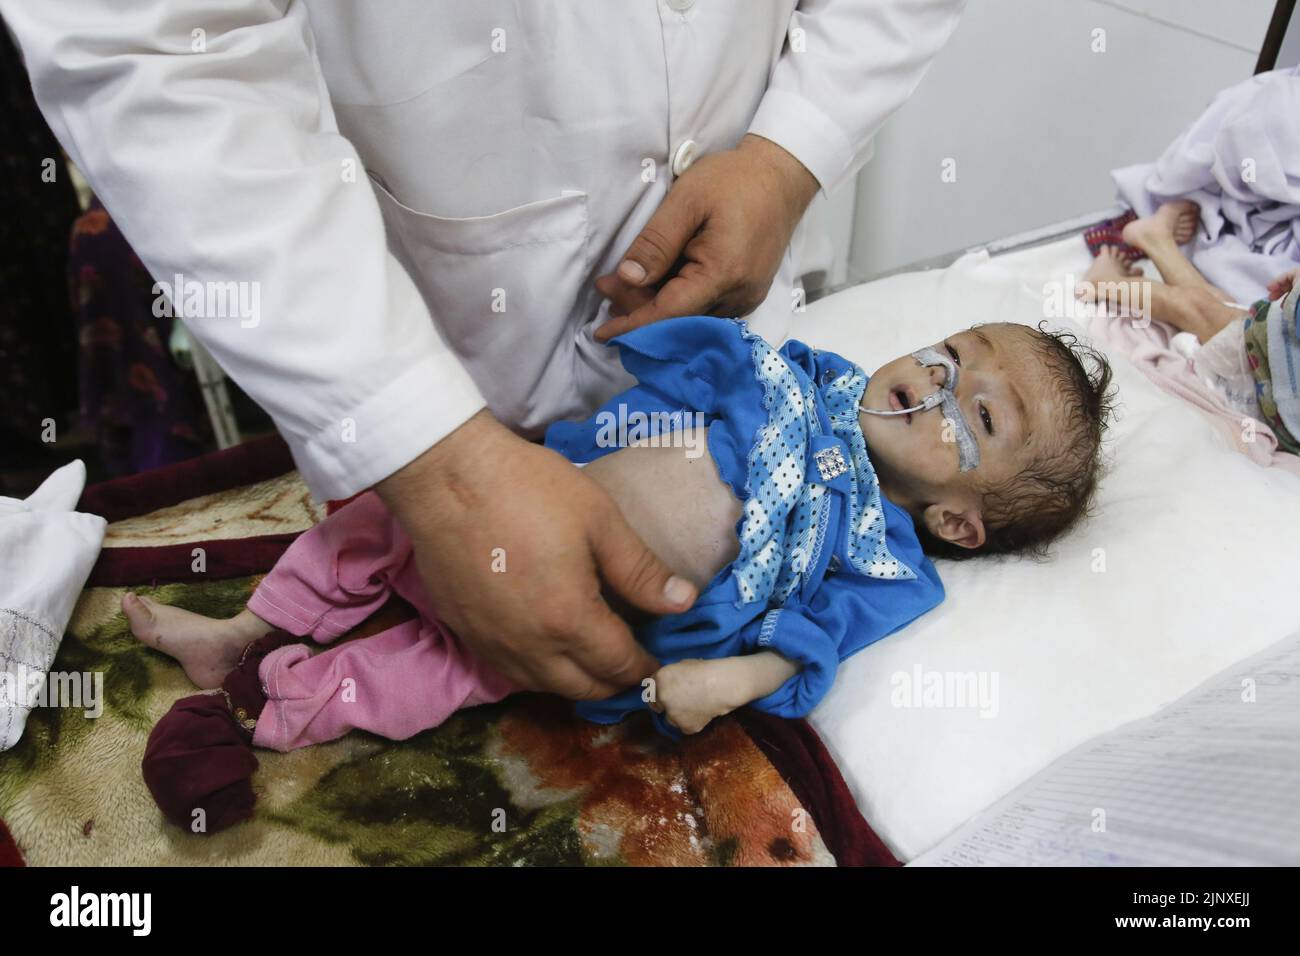 File photo taken in June 2022 shows a child receiving medical treatment for malnutrition at a hospital in Kabul. (Kyodo)==Kyodo  Photo via Newscom Stock Photo